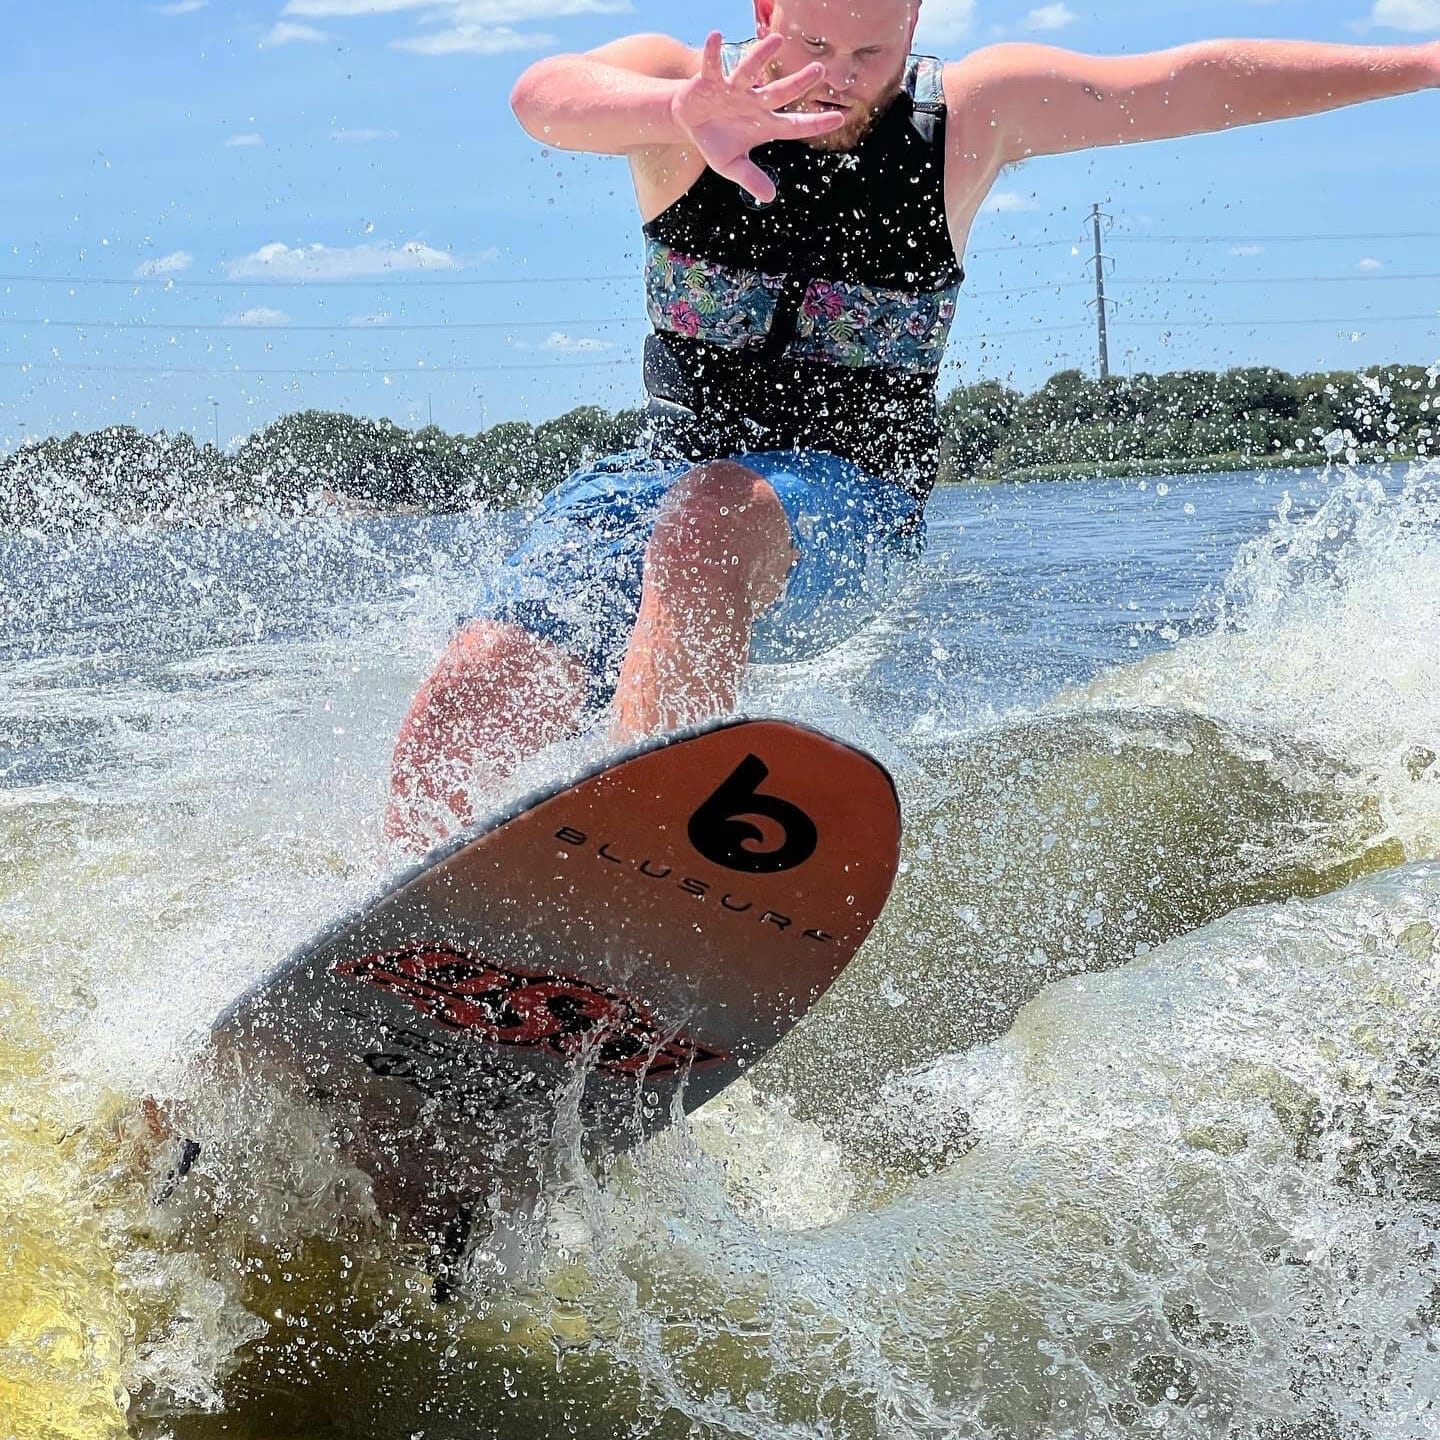 A man on a surfboard riding a wave with wakesurf board.